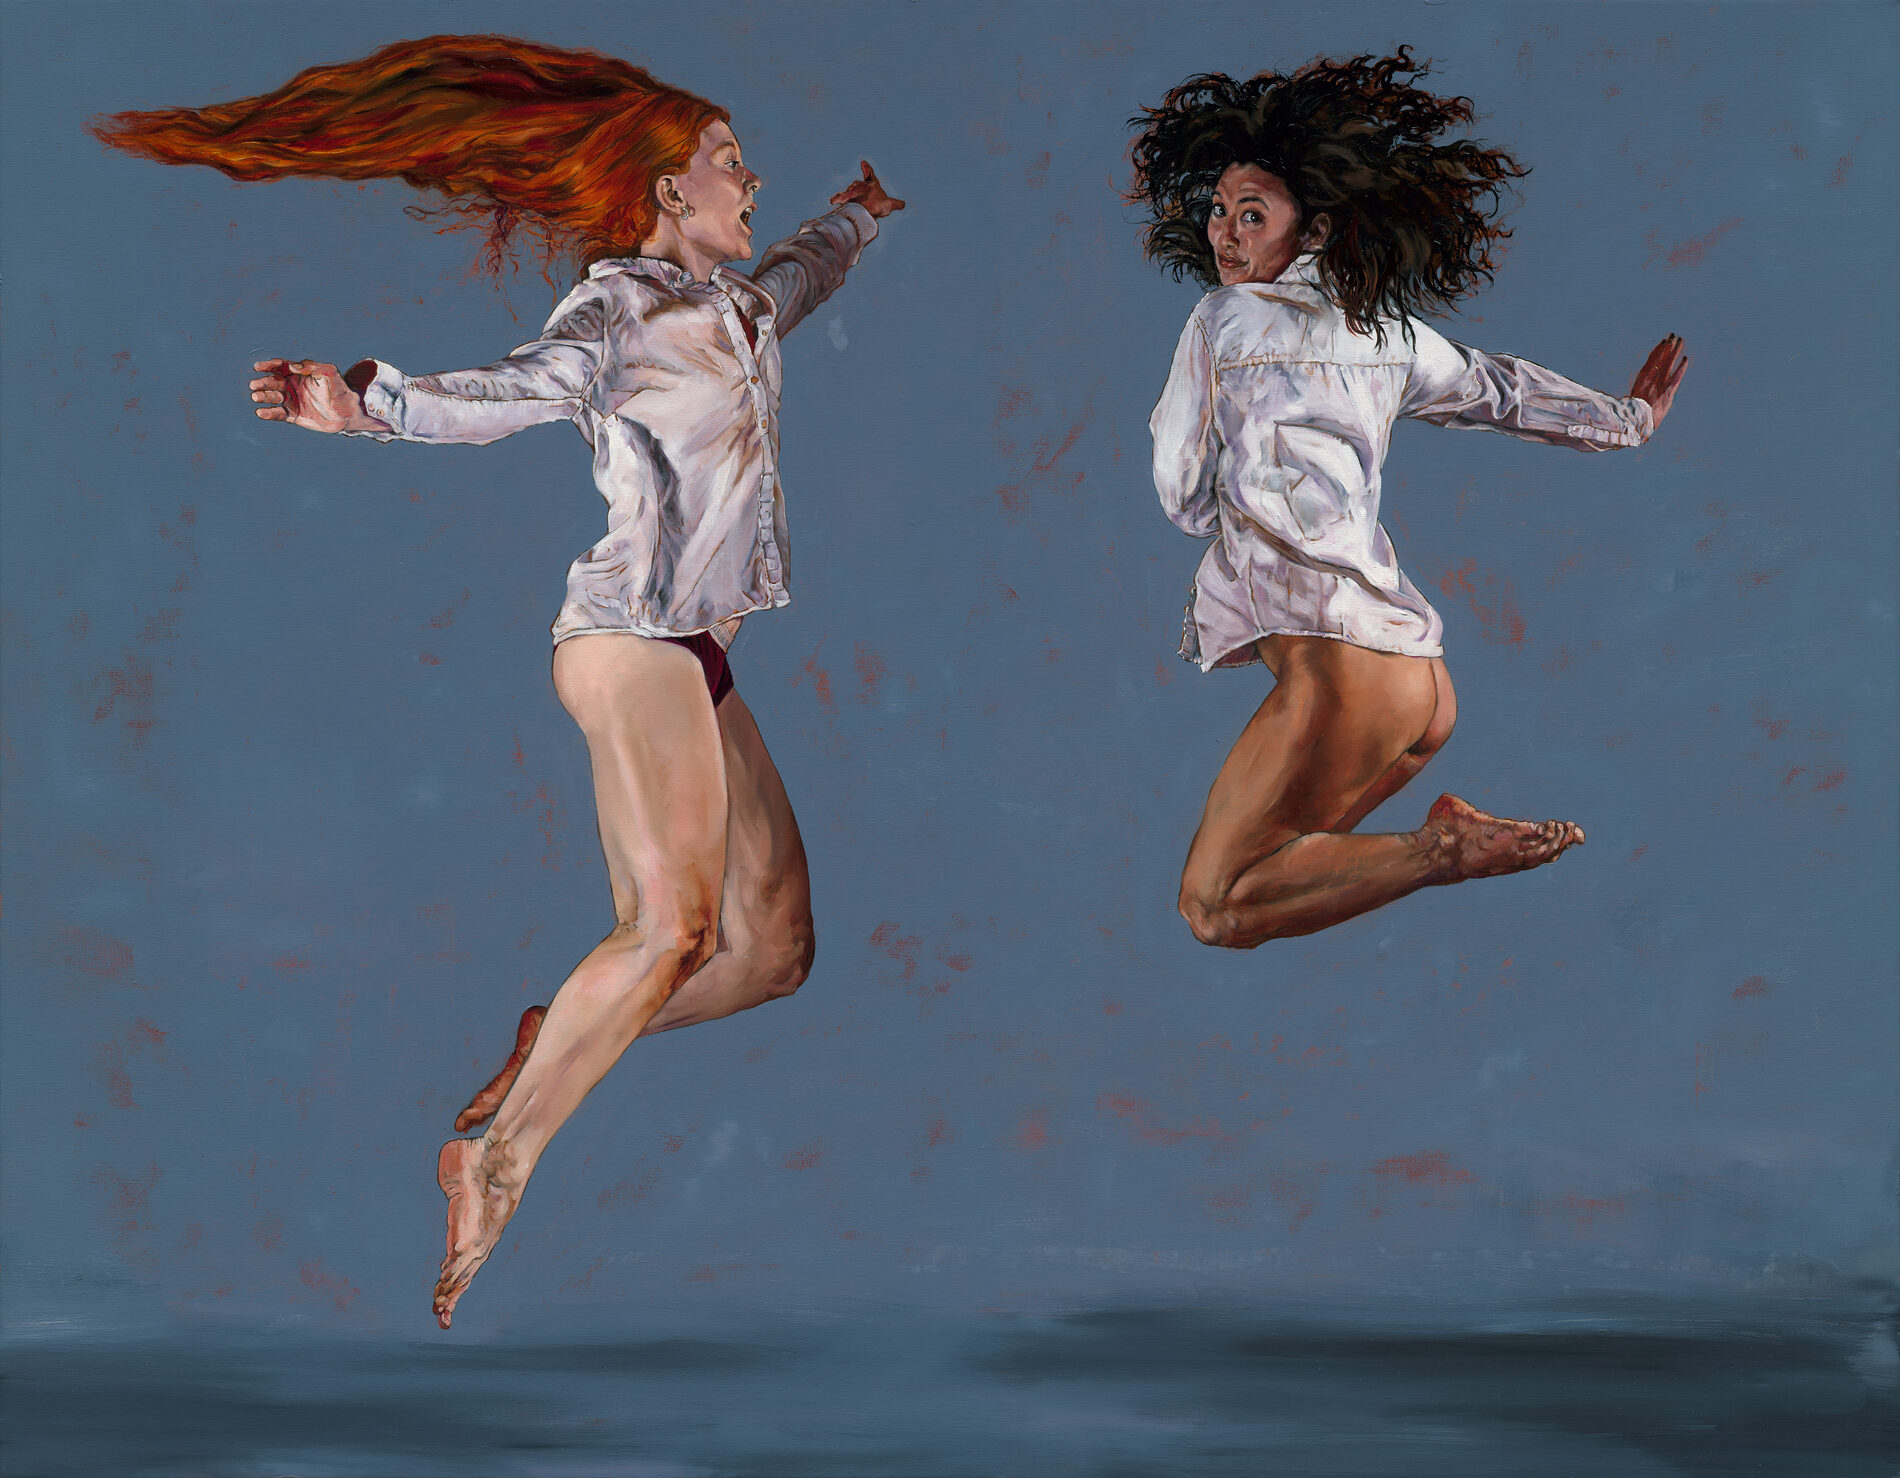 Two young women in underwear and button down shirts jumping in the air.